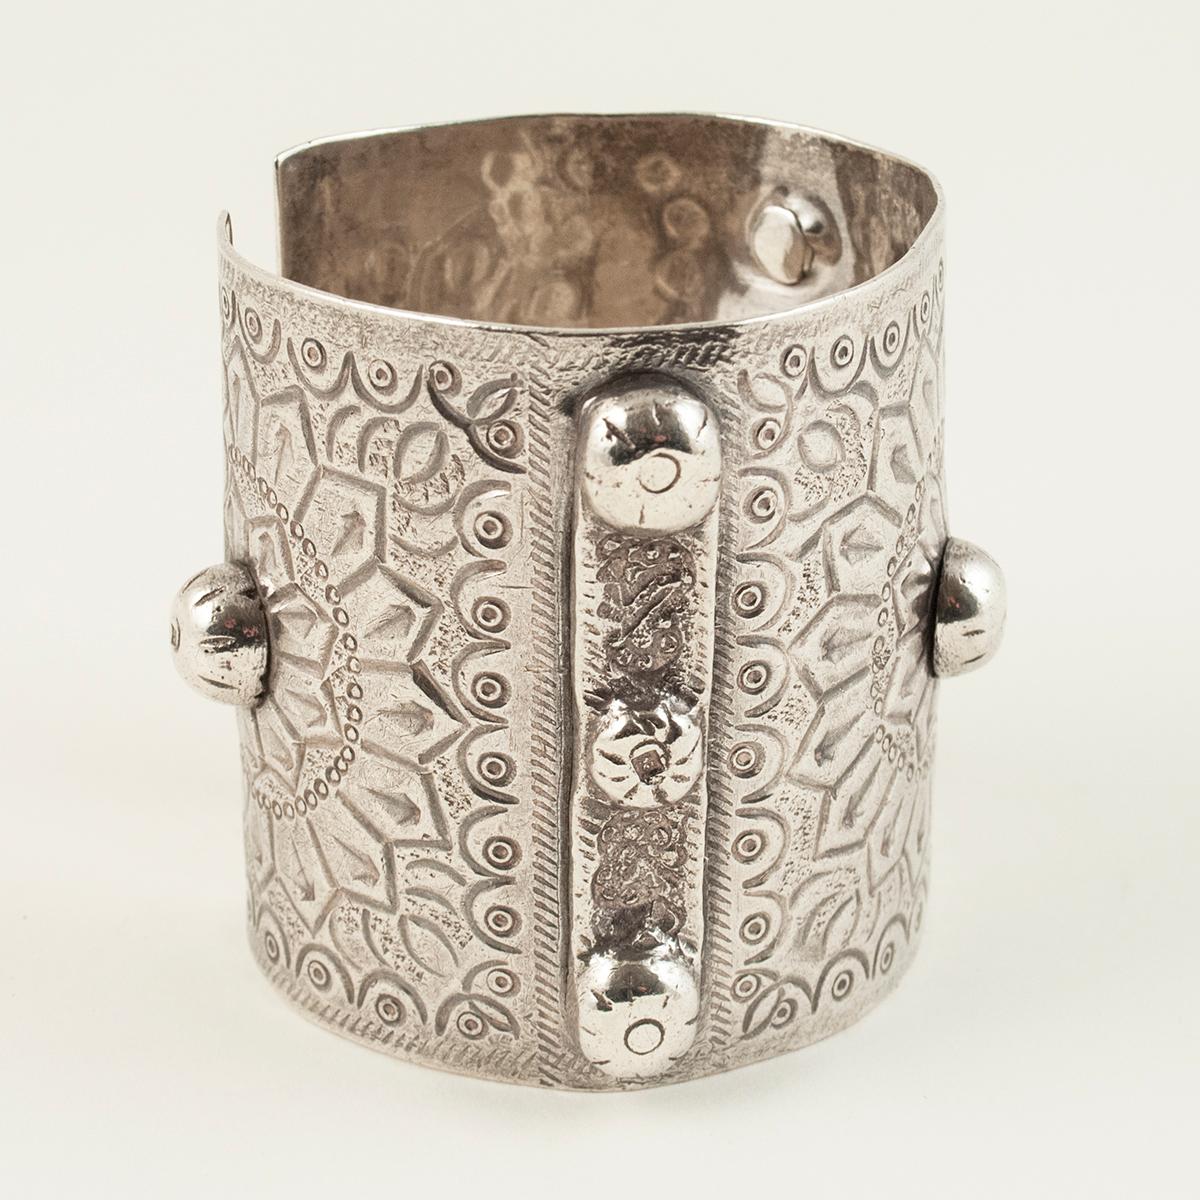 Hand-Crafted Mid-20th Century Silver Tribal Cuff, Berber People, Siwa Oasis, Egypt